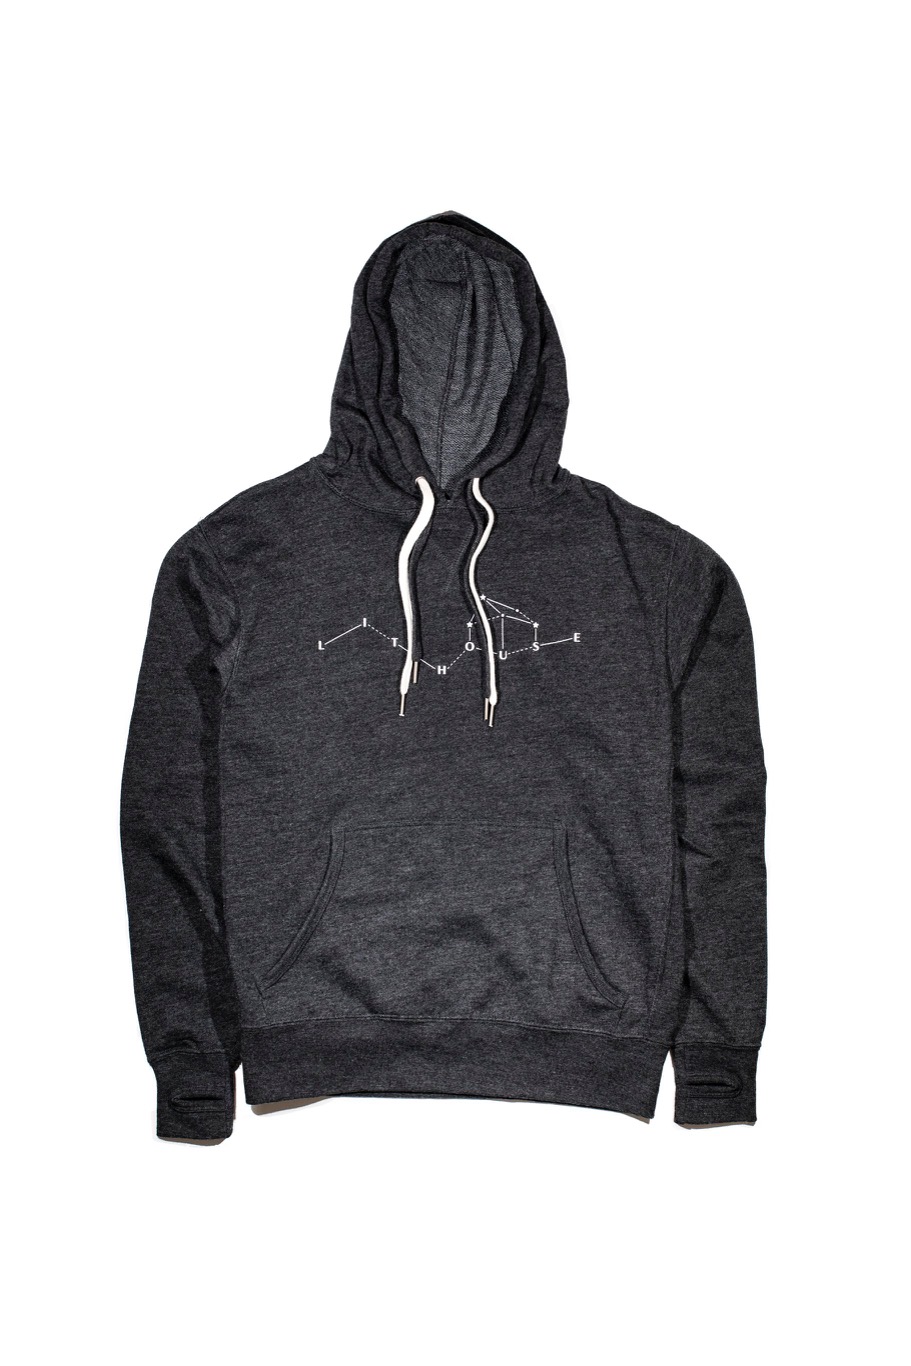 Unisex Pullover Hoodie — LitHouse